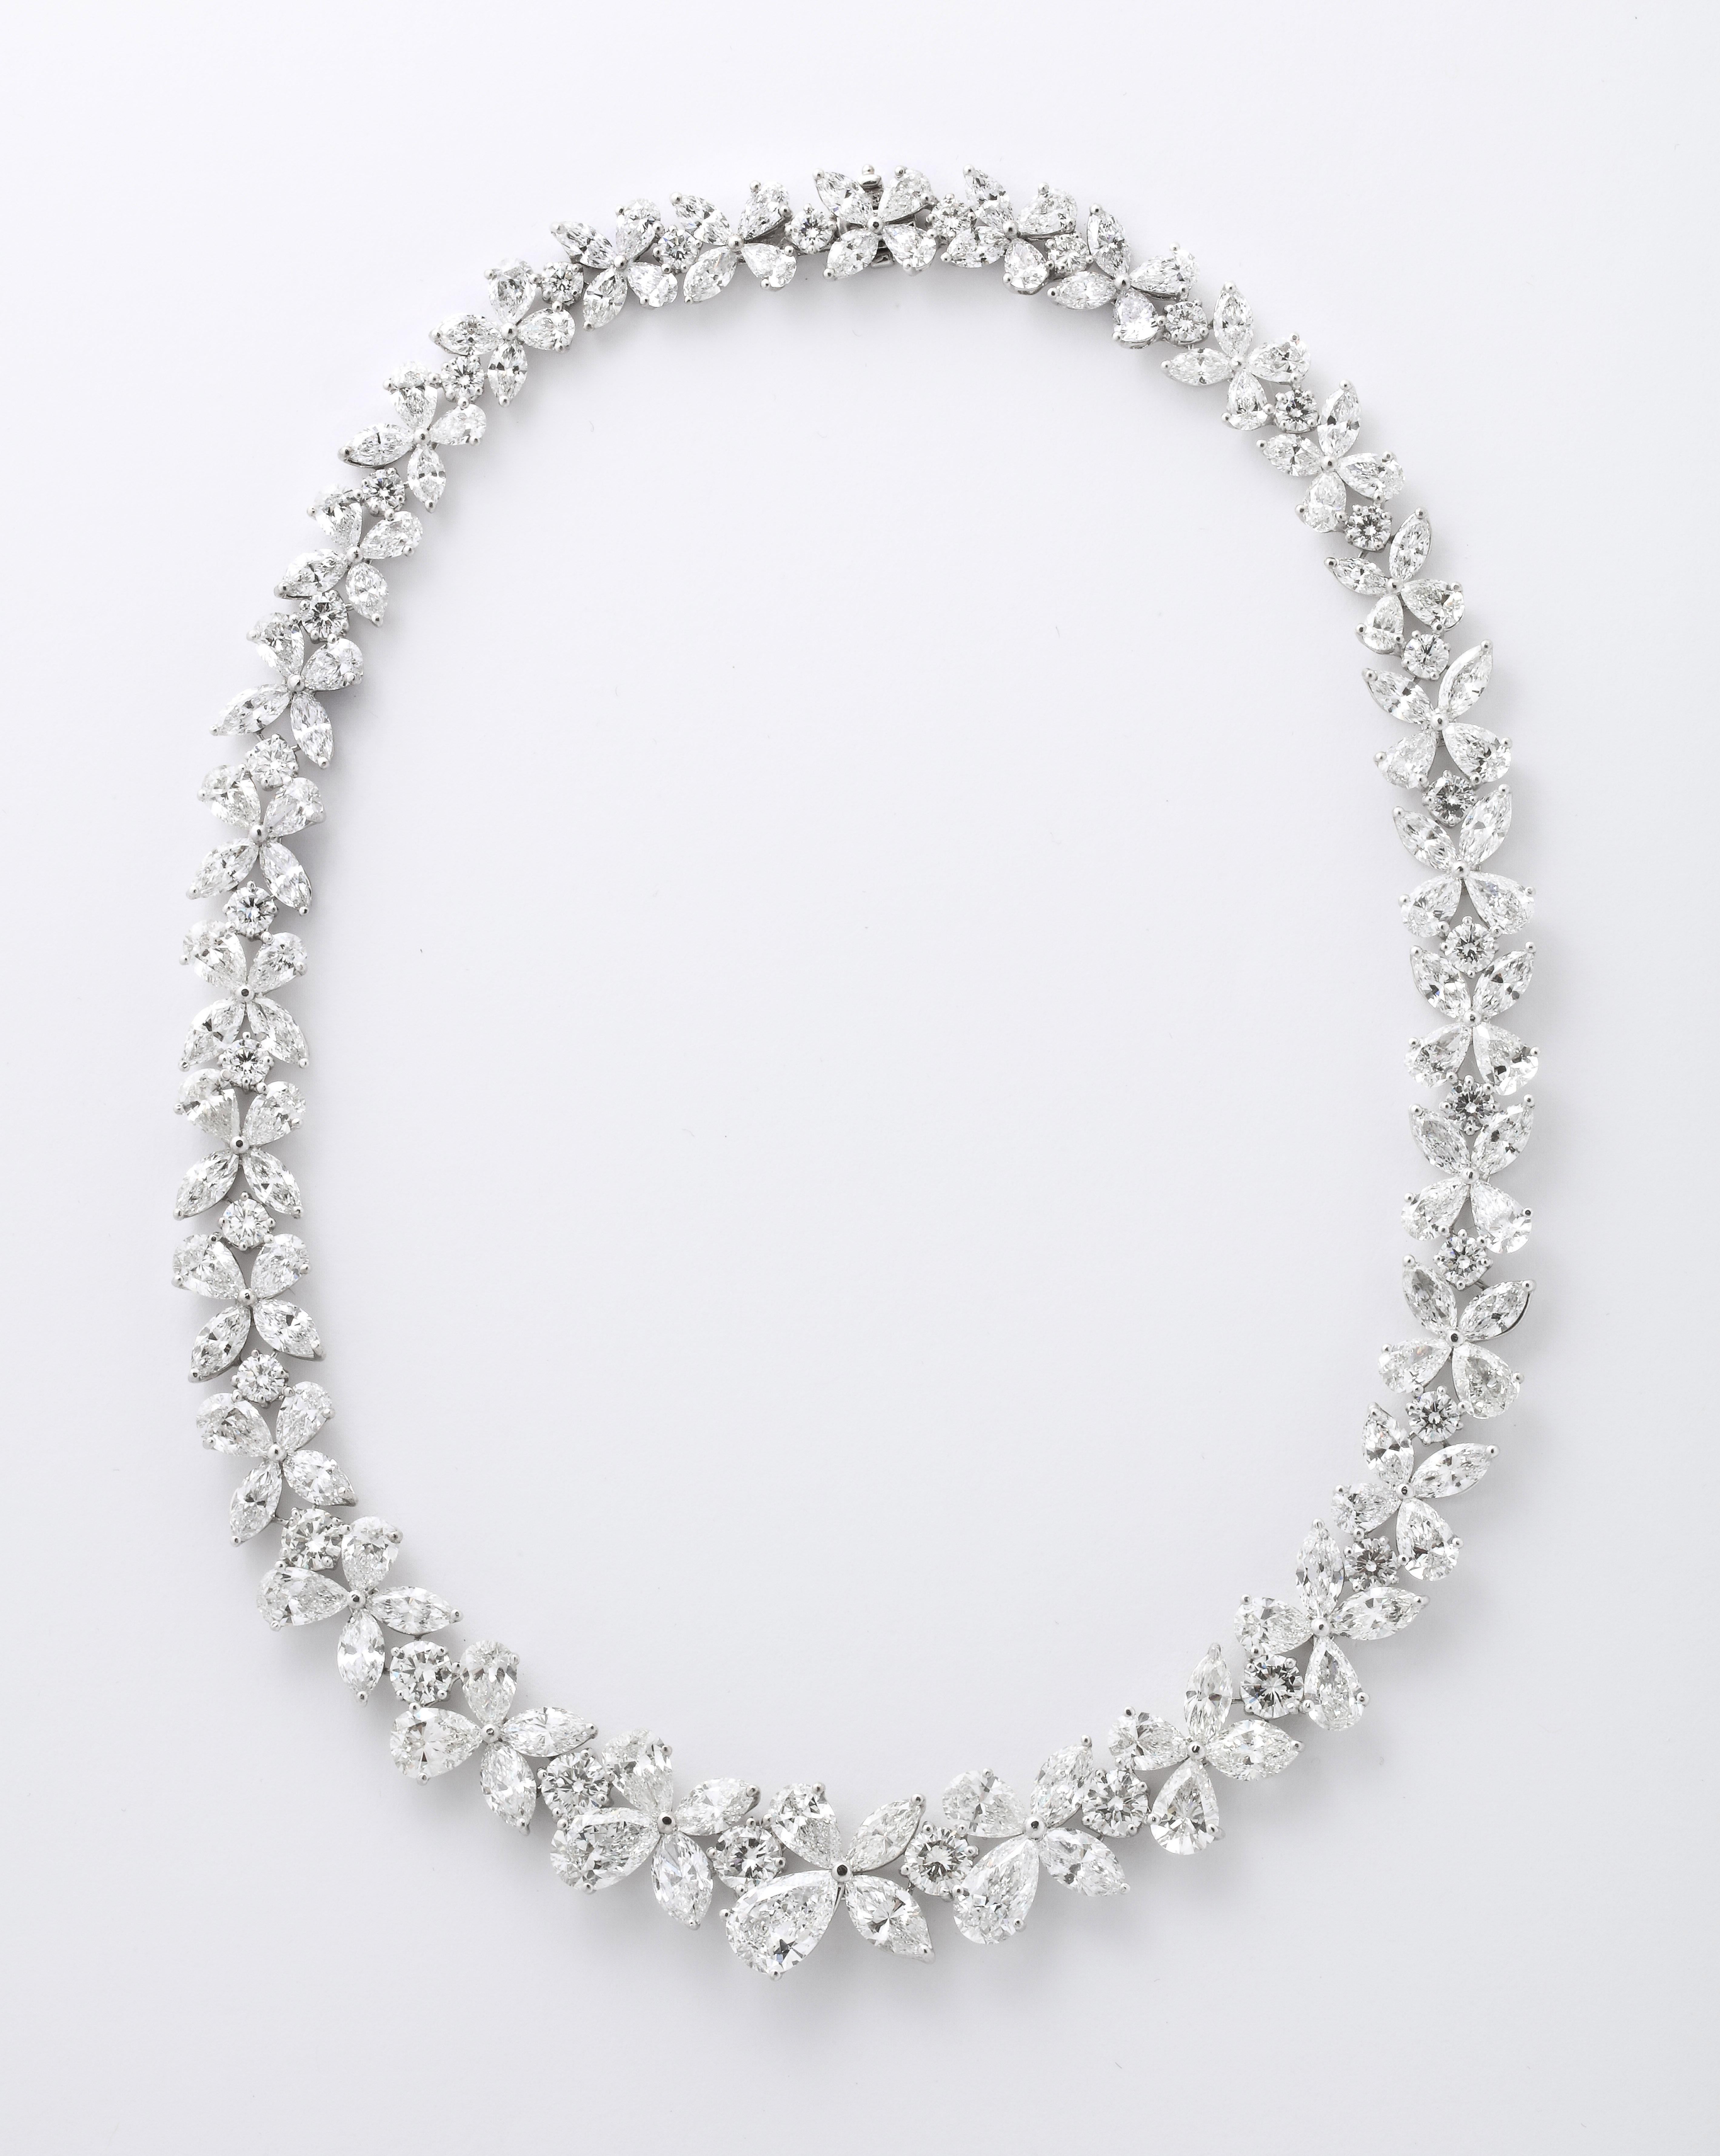 
An important diamond wreath necklace. 

76.82 carats of white pear, marquise and round brilliant cut diamonds set in platinum. 

An incredible necklace -- full of sparkle -- featuring diamonds from 1 to over 2 carats in the center.

The center link